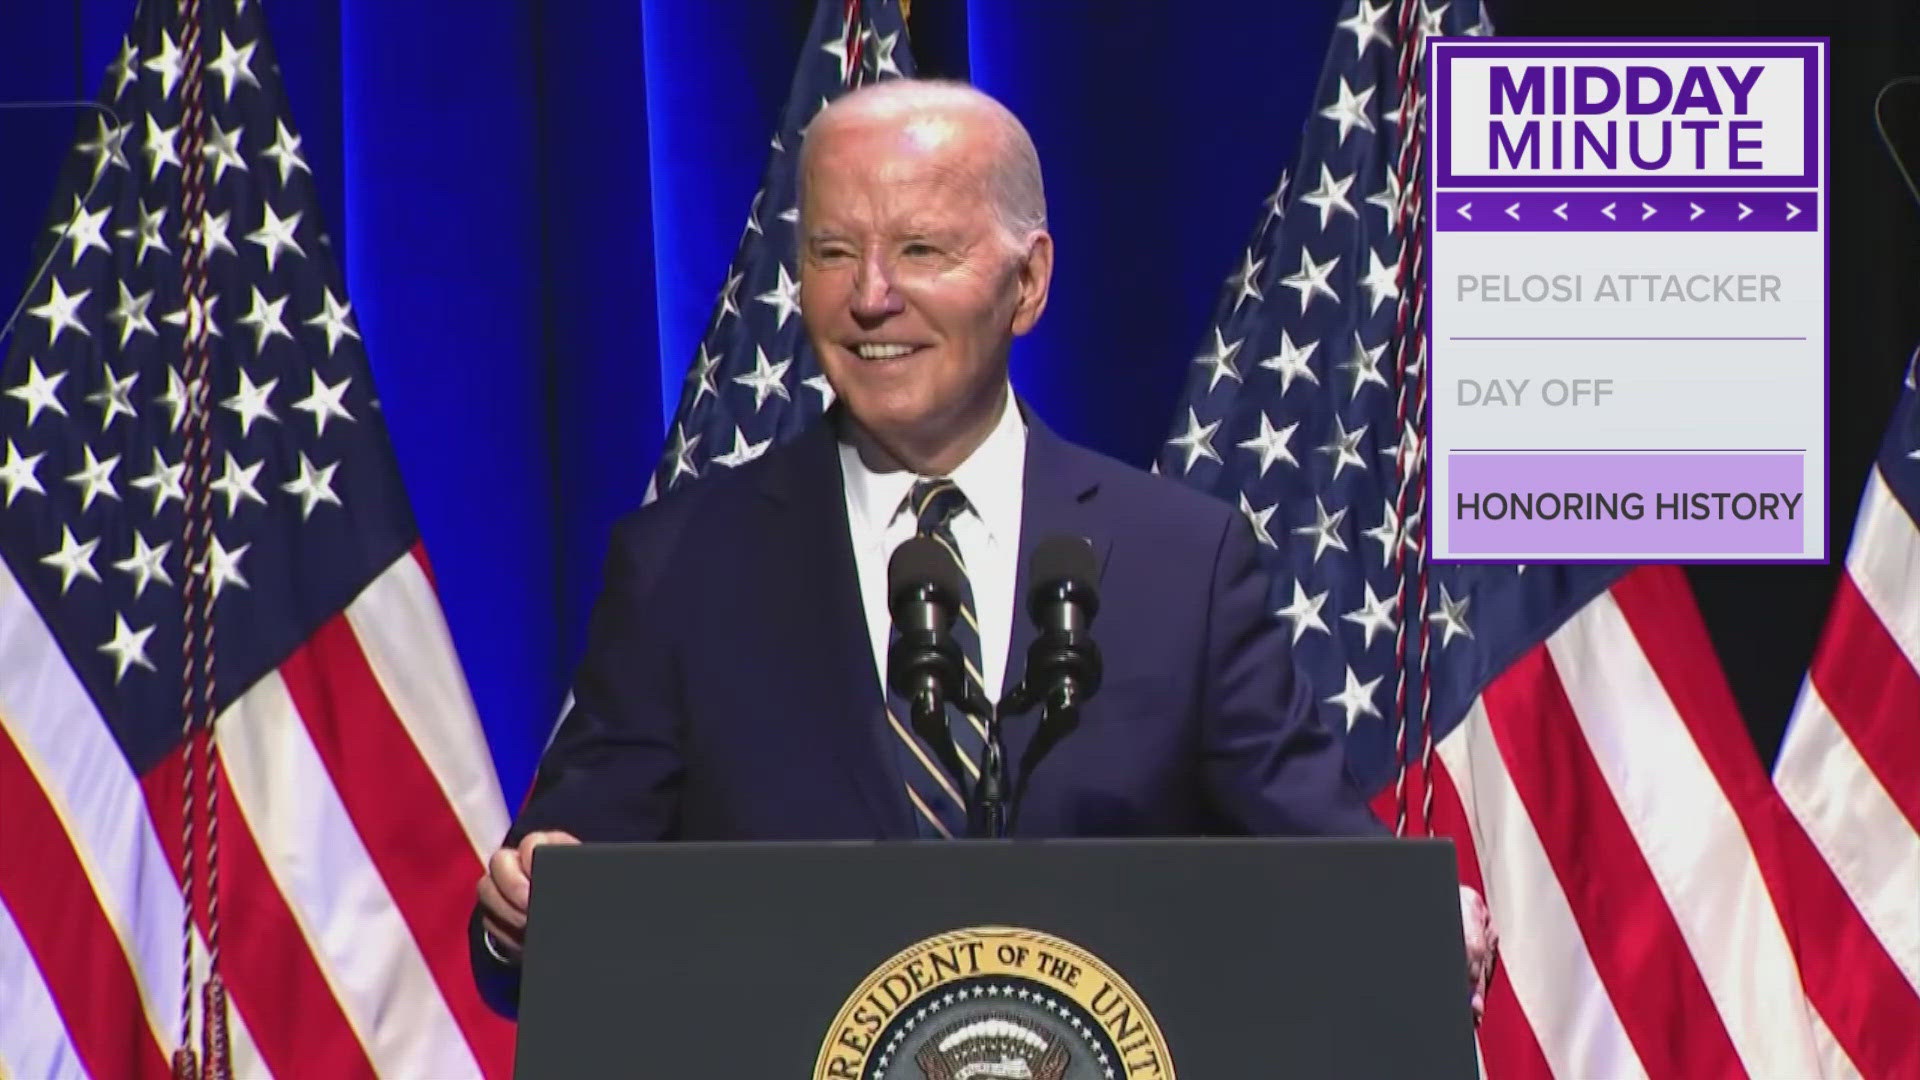 Biden honored the 70th anniversary of Brown vs. Board of Education in a ceremony Friday.